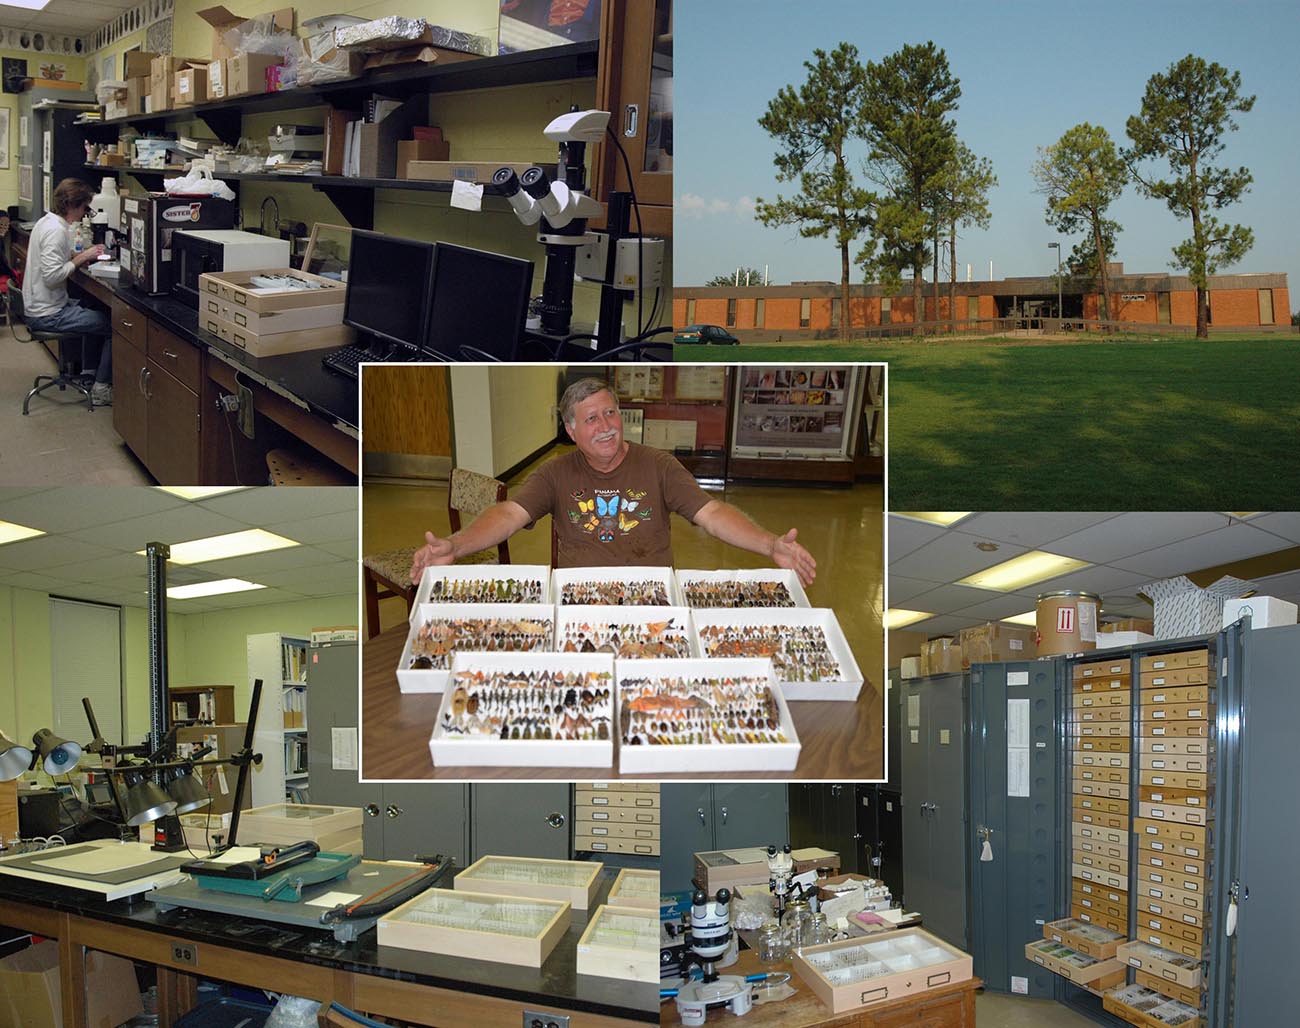 Images of the Mississippi Entomological Museum